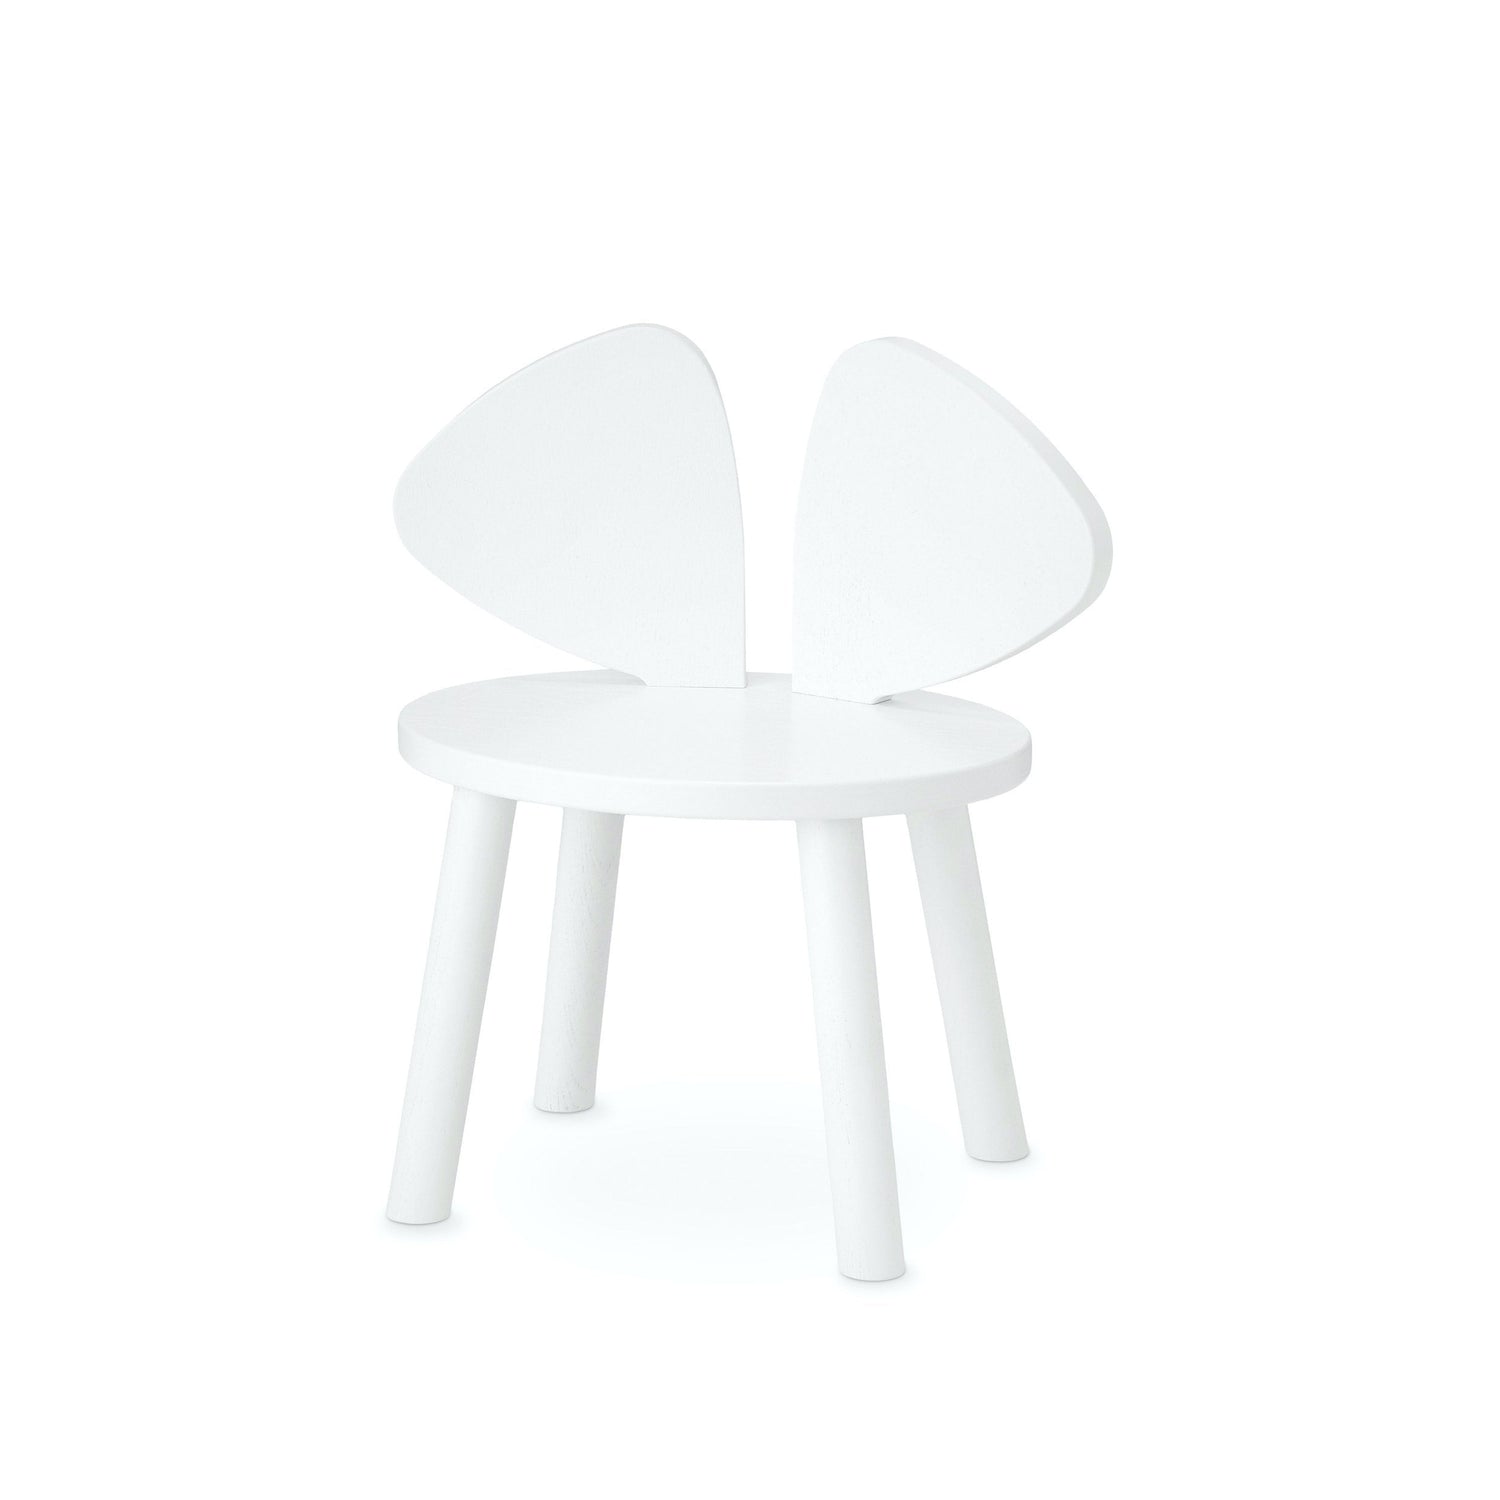 Mouse Chair age 2-5 Wood Nofred 